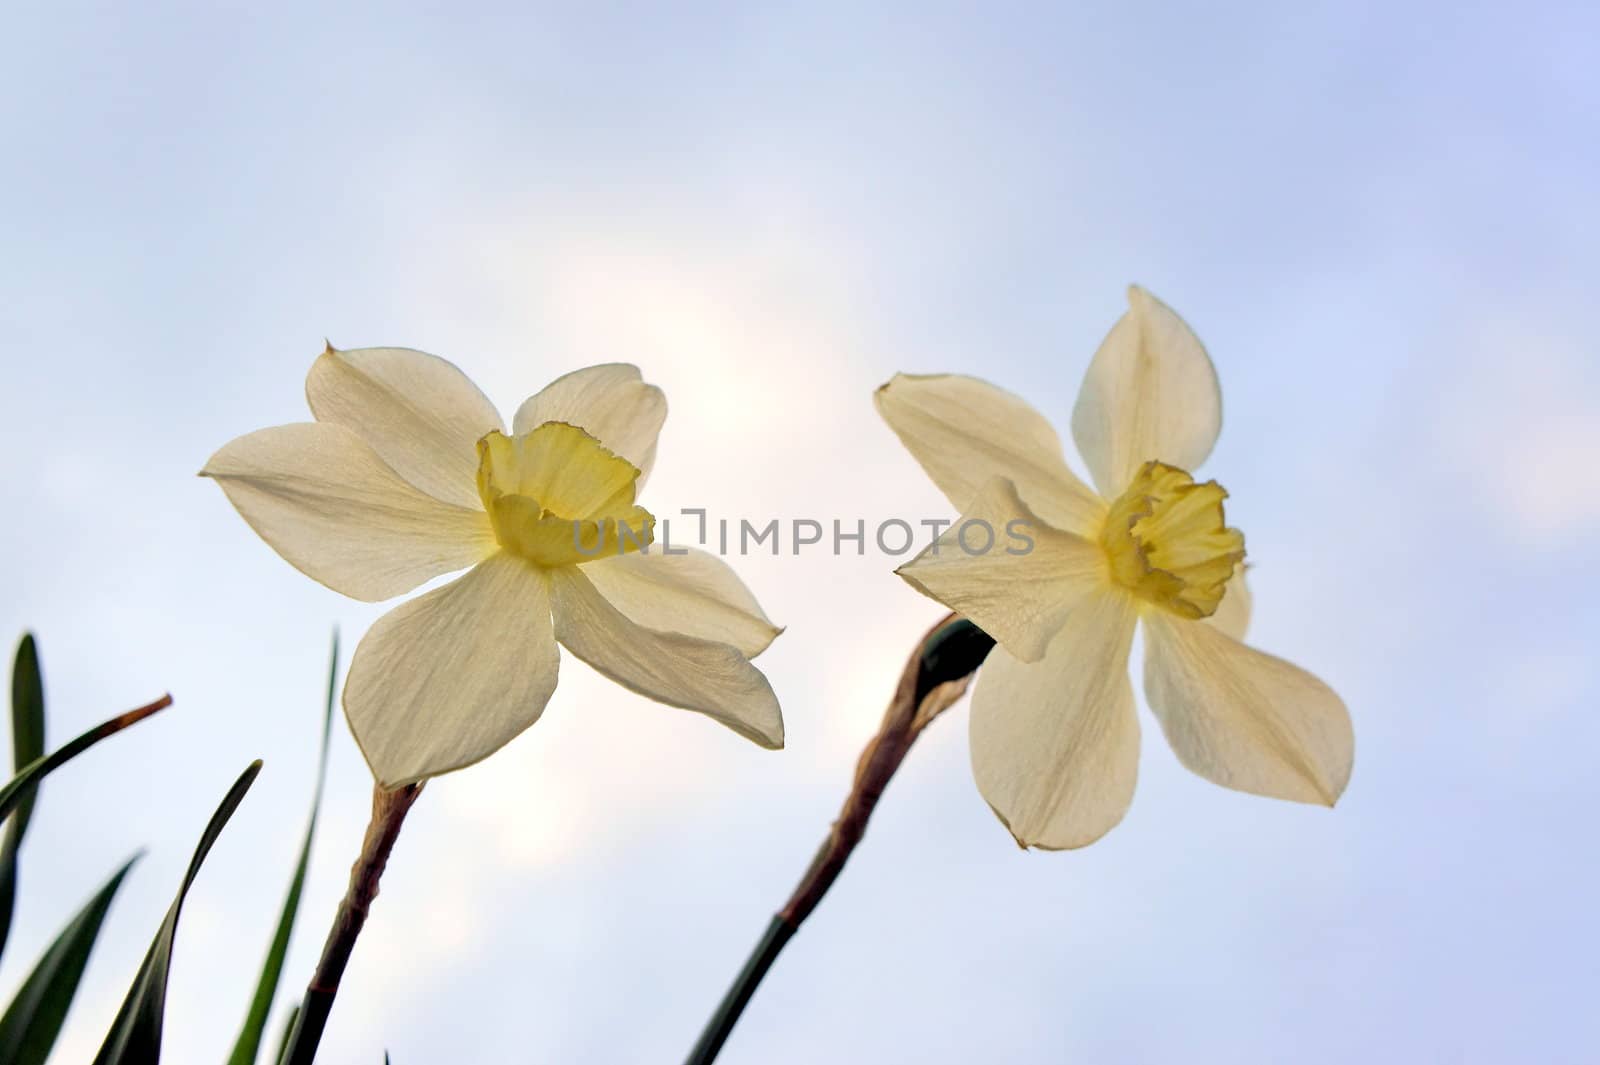 Two simple horticultural white daffodils with a yellow crown in natural light on a nature blue sky background.